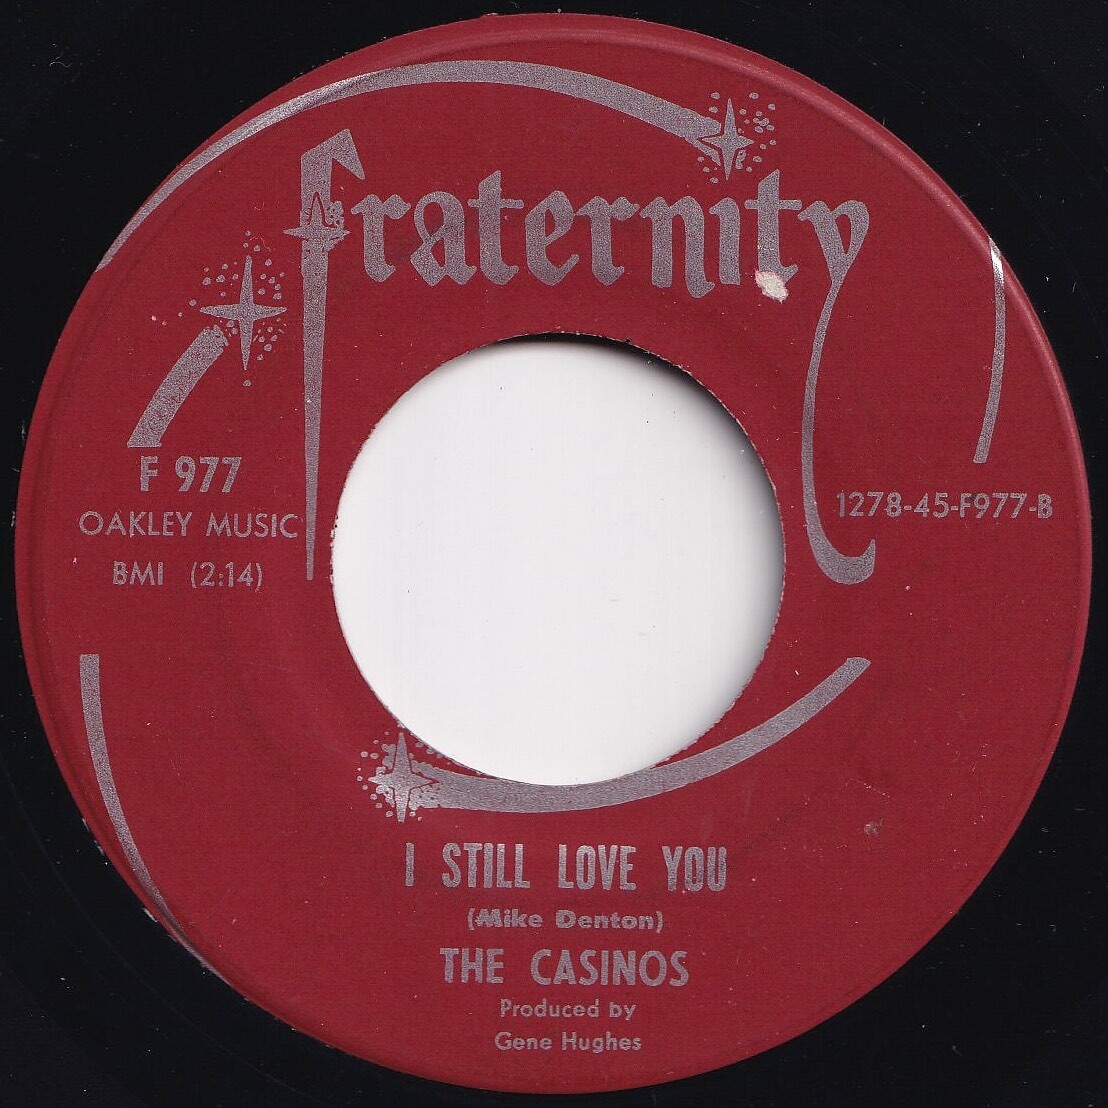 Casinos Then You Can Tell Me Goodbye / I Still Love You Fraternity US F 977 206164 R&B R&R レコード 7インチ 45の画像2